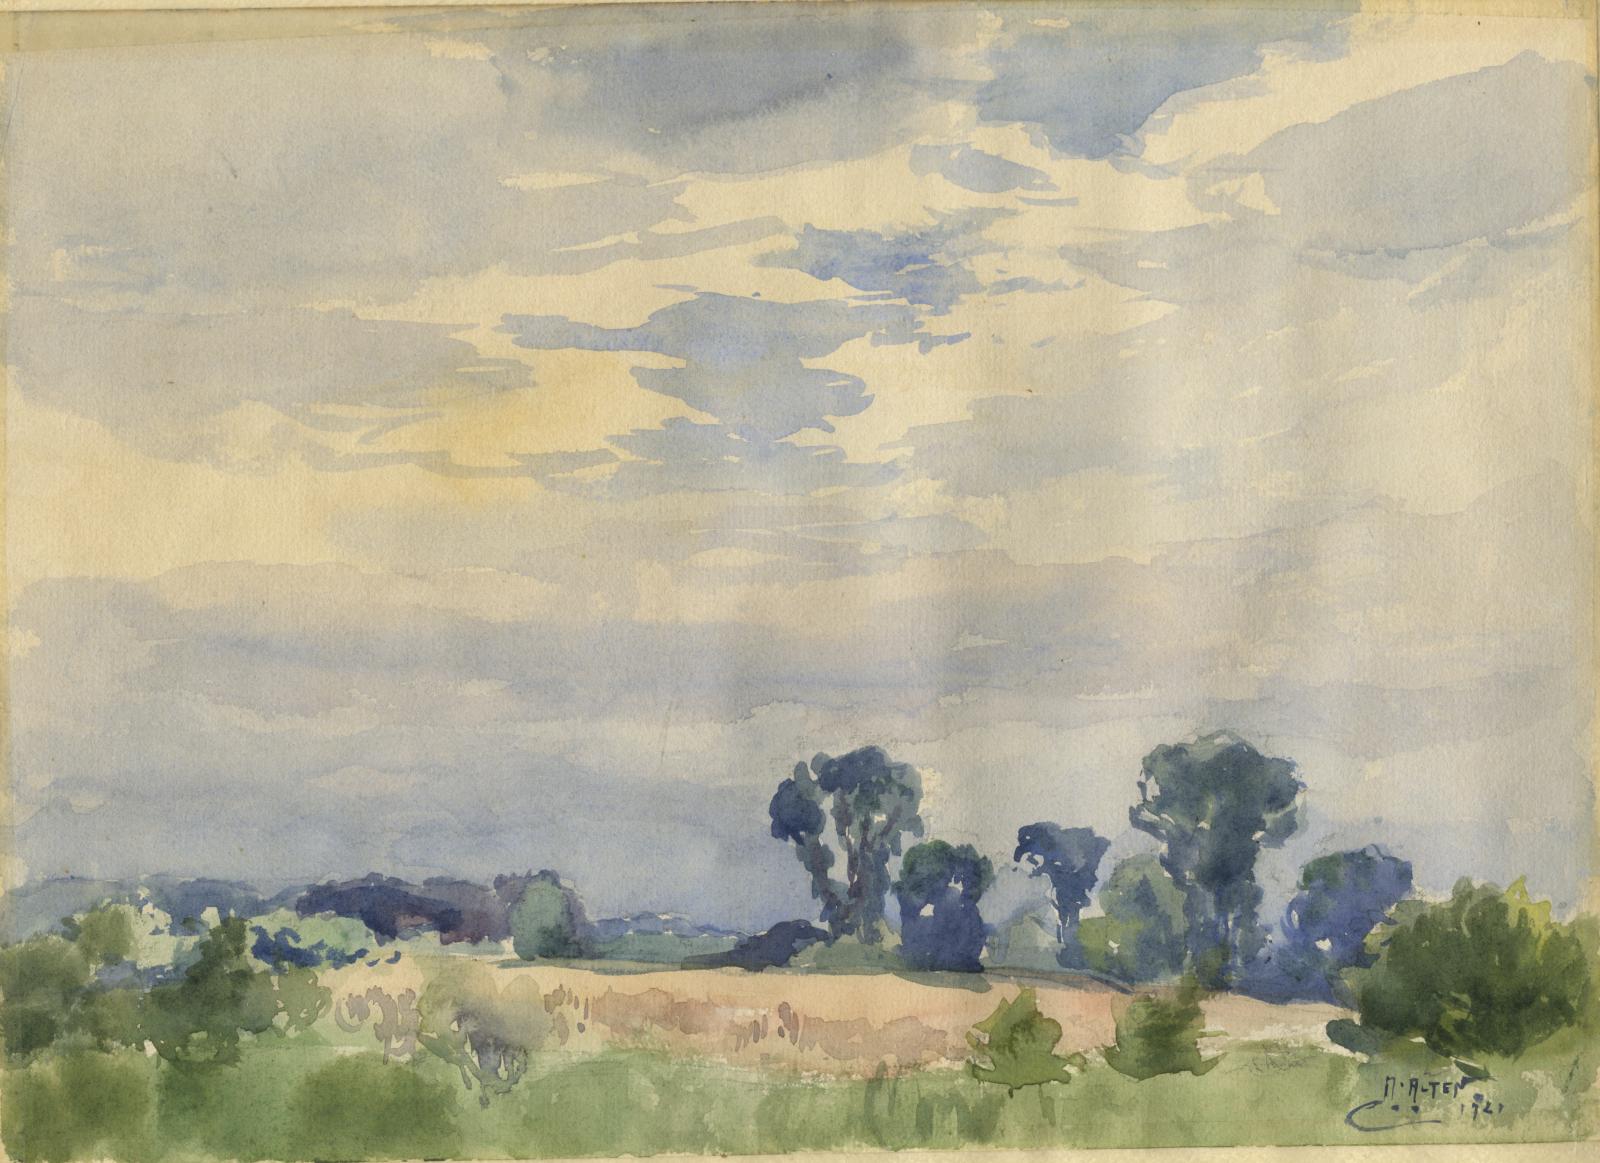 Watercolor image of a landscape with blue skies and green trees.